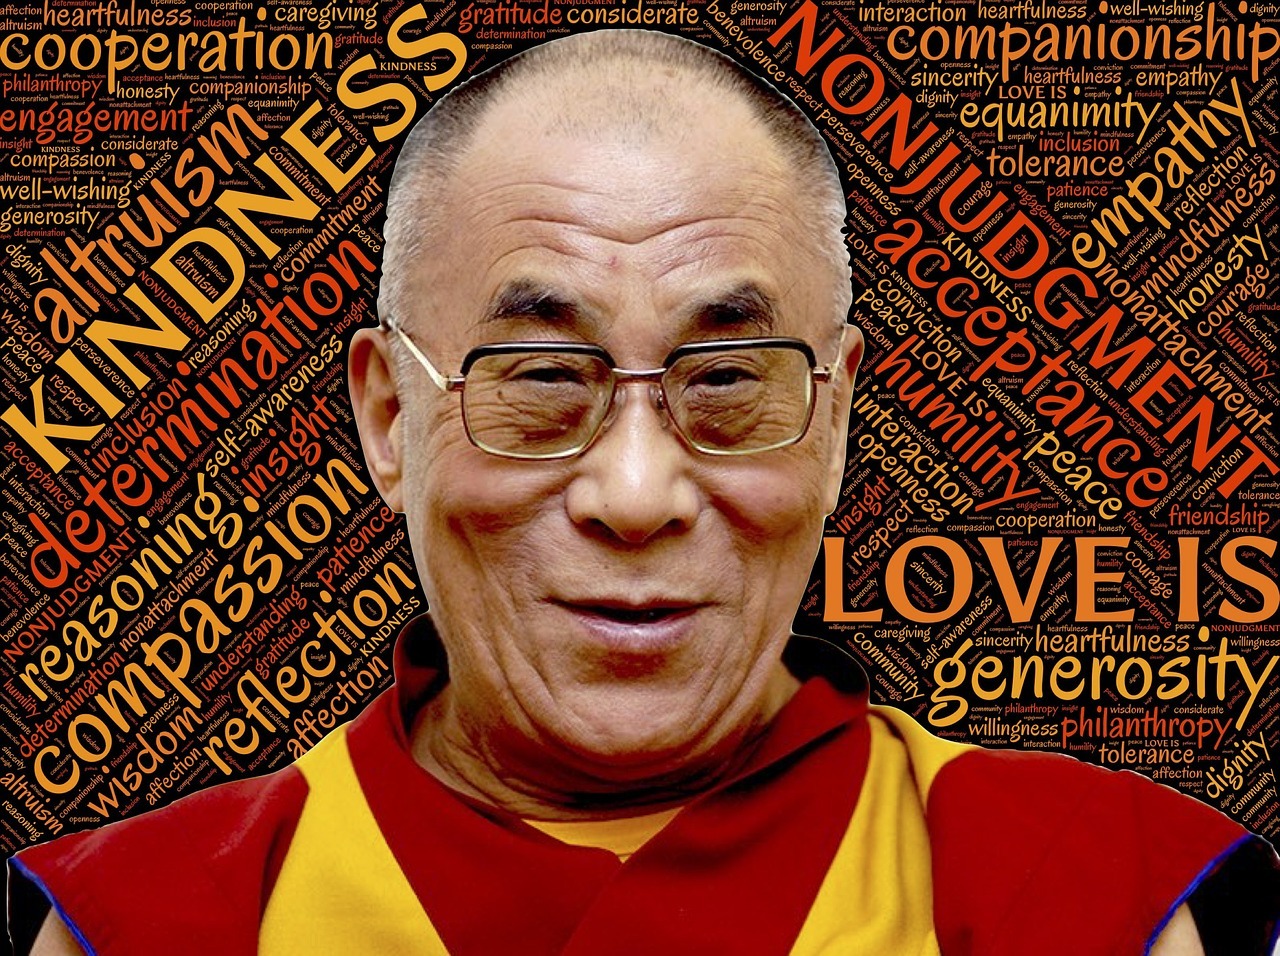 Dalai Lama’s 10 ways to be in a healthy state of mind